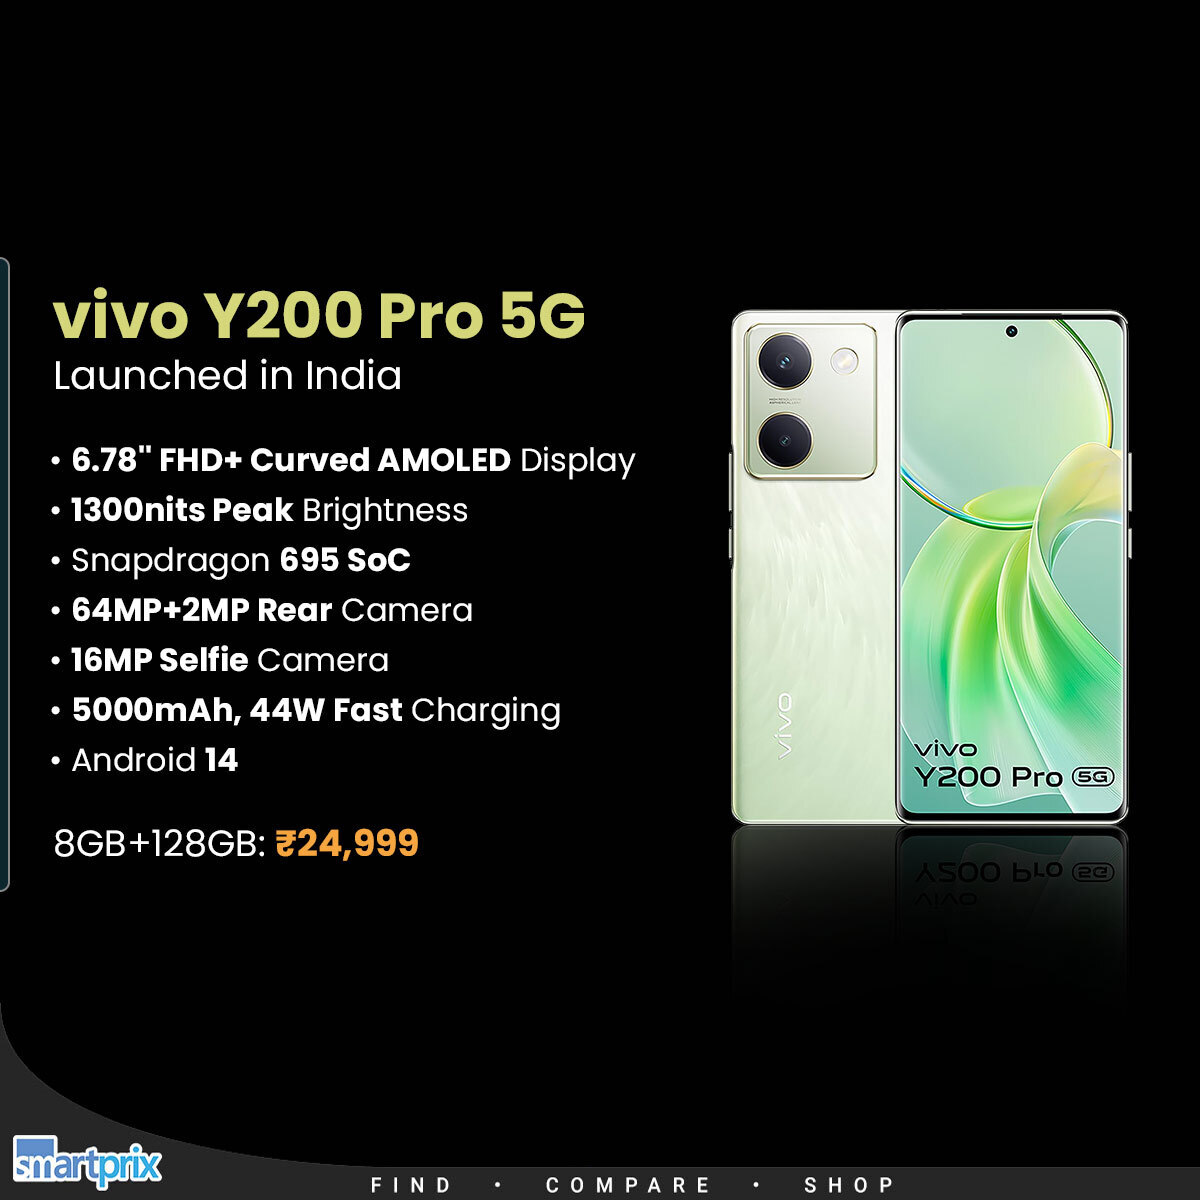 vivo Y200 Pro 5G launched in India with Snapdragon 695 smpx.to/VhlzVU Share your thoughts about pricing! #vivo #vivoY200Pro